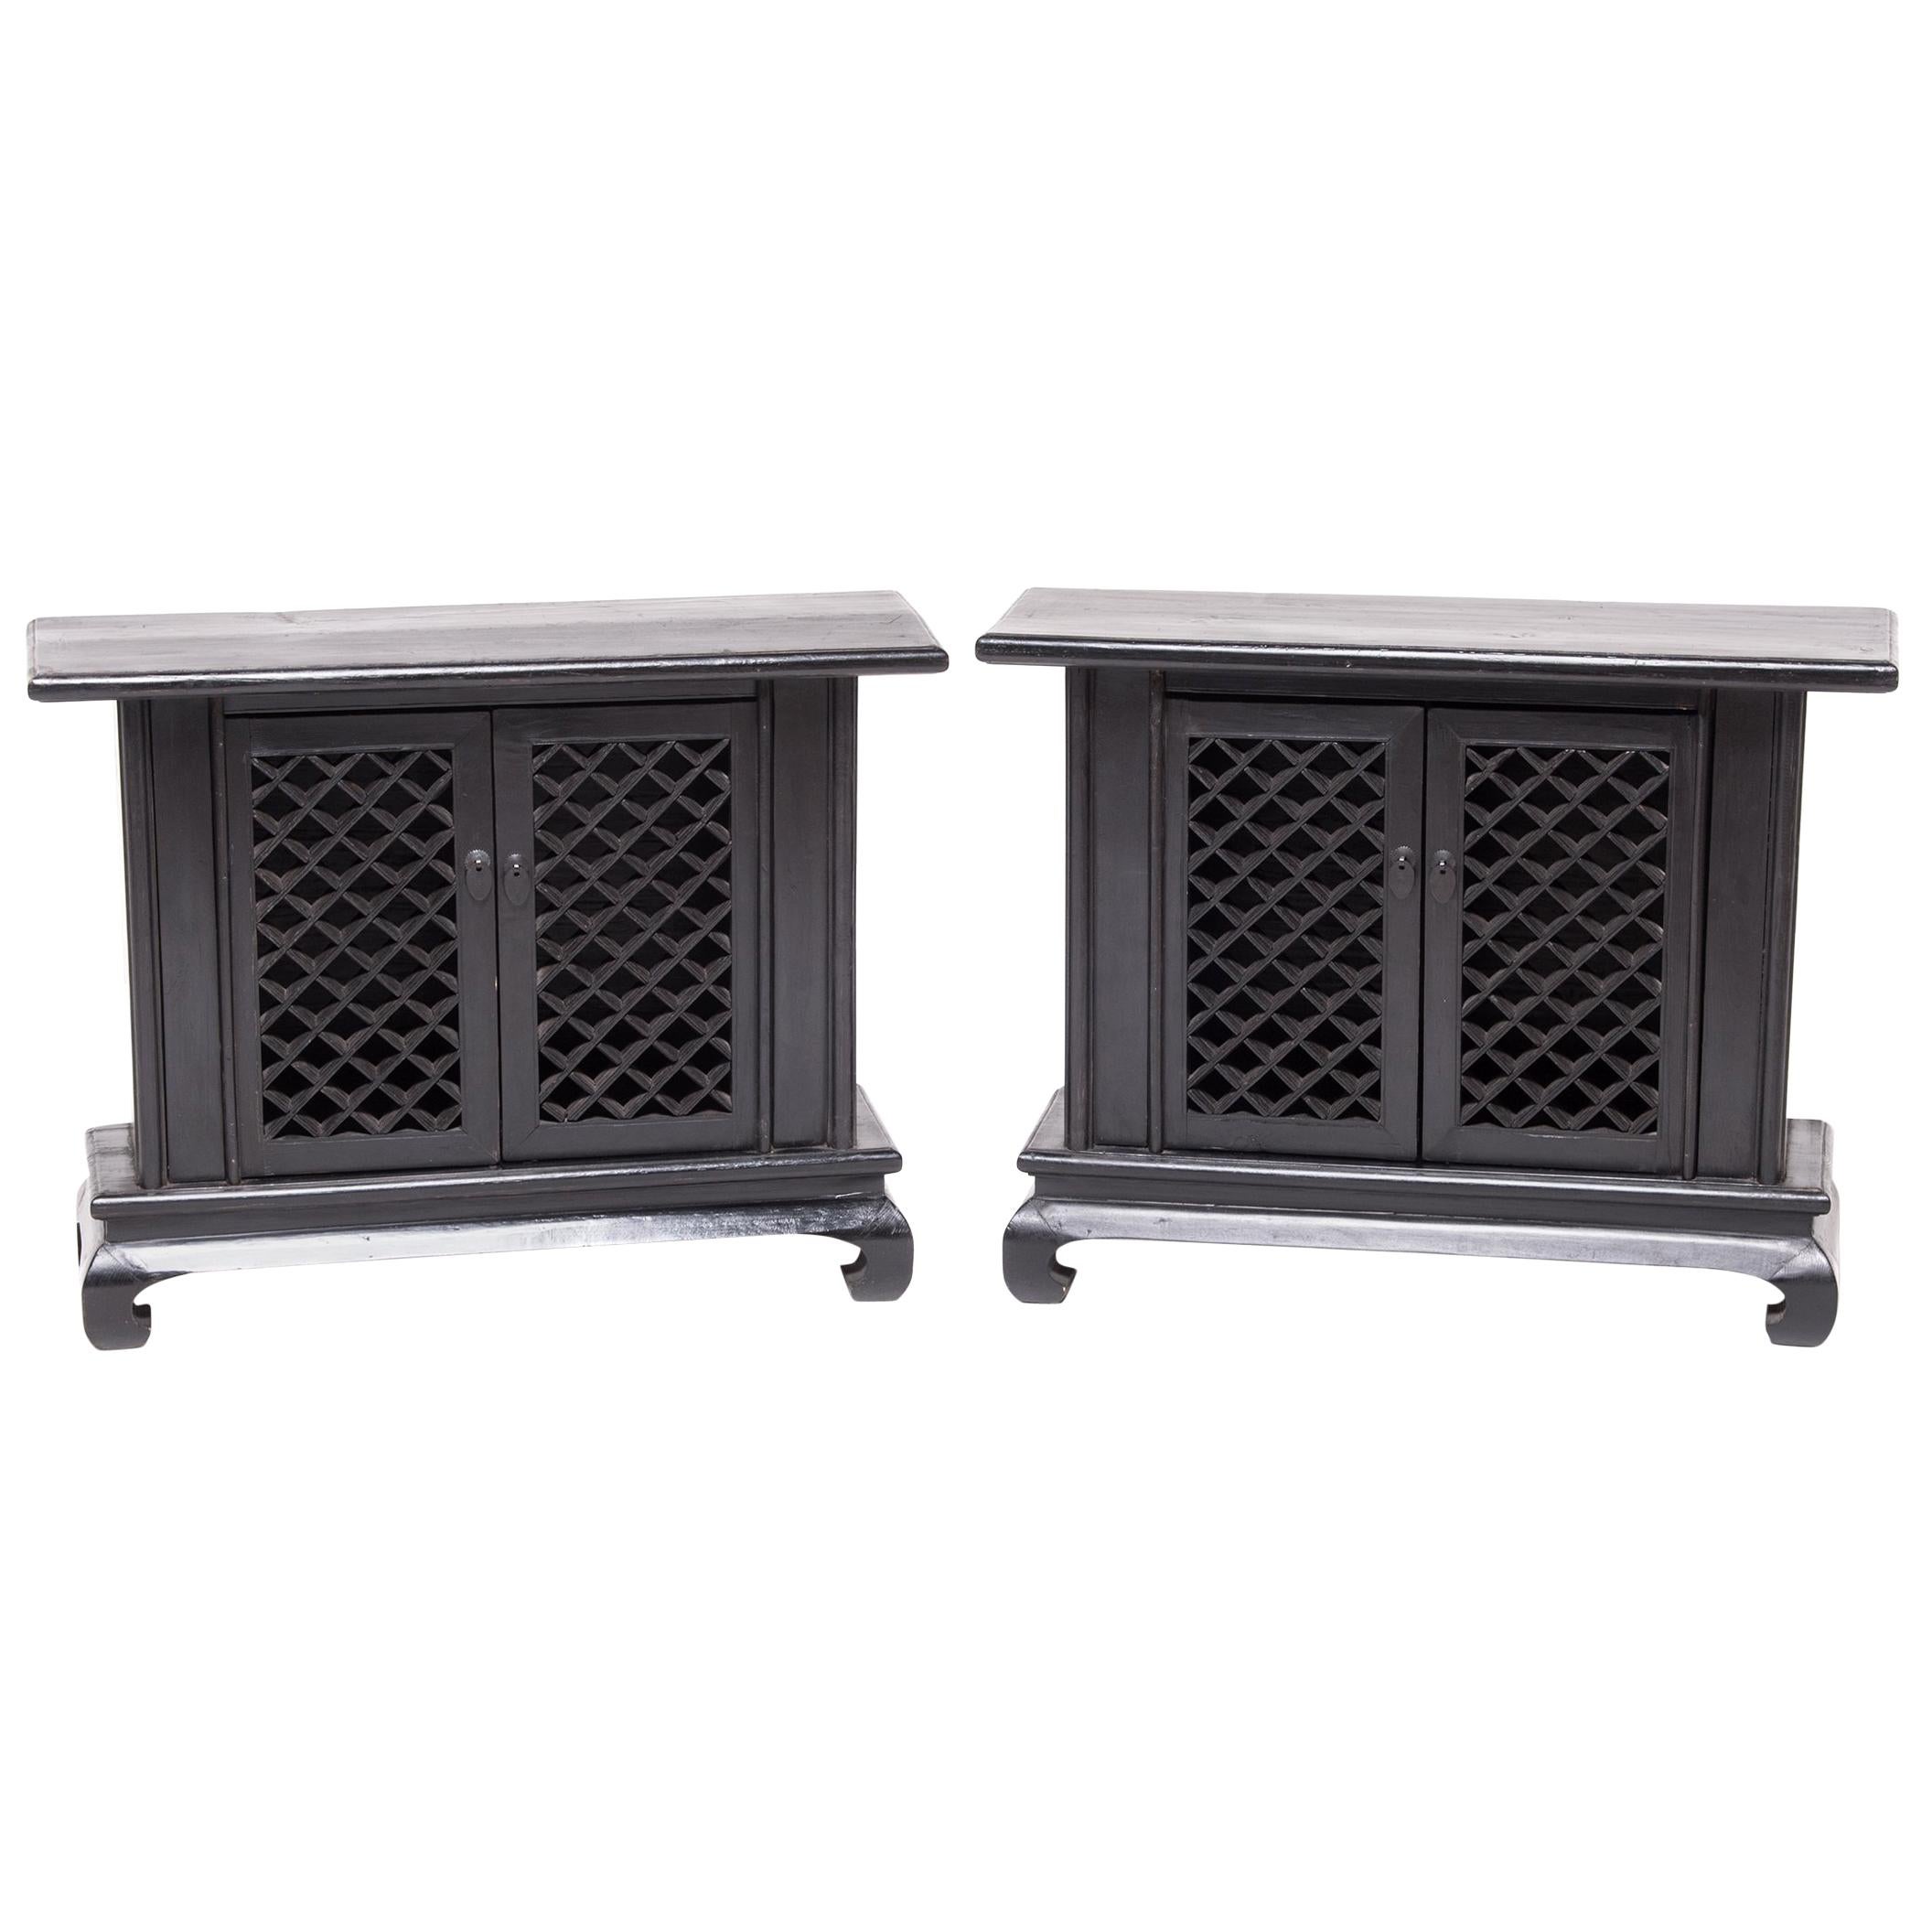 Pair of 20th Century Chinese Low Lattice Front Cabinets